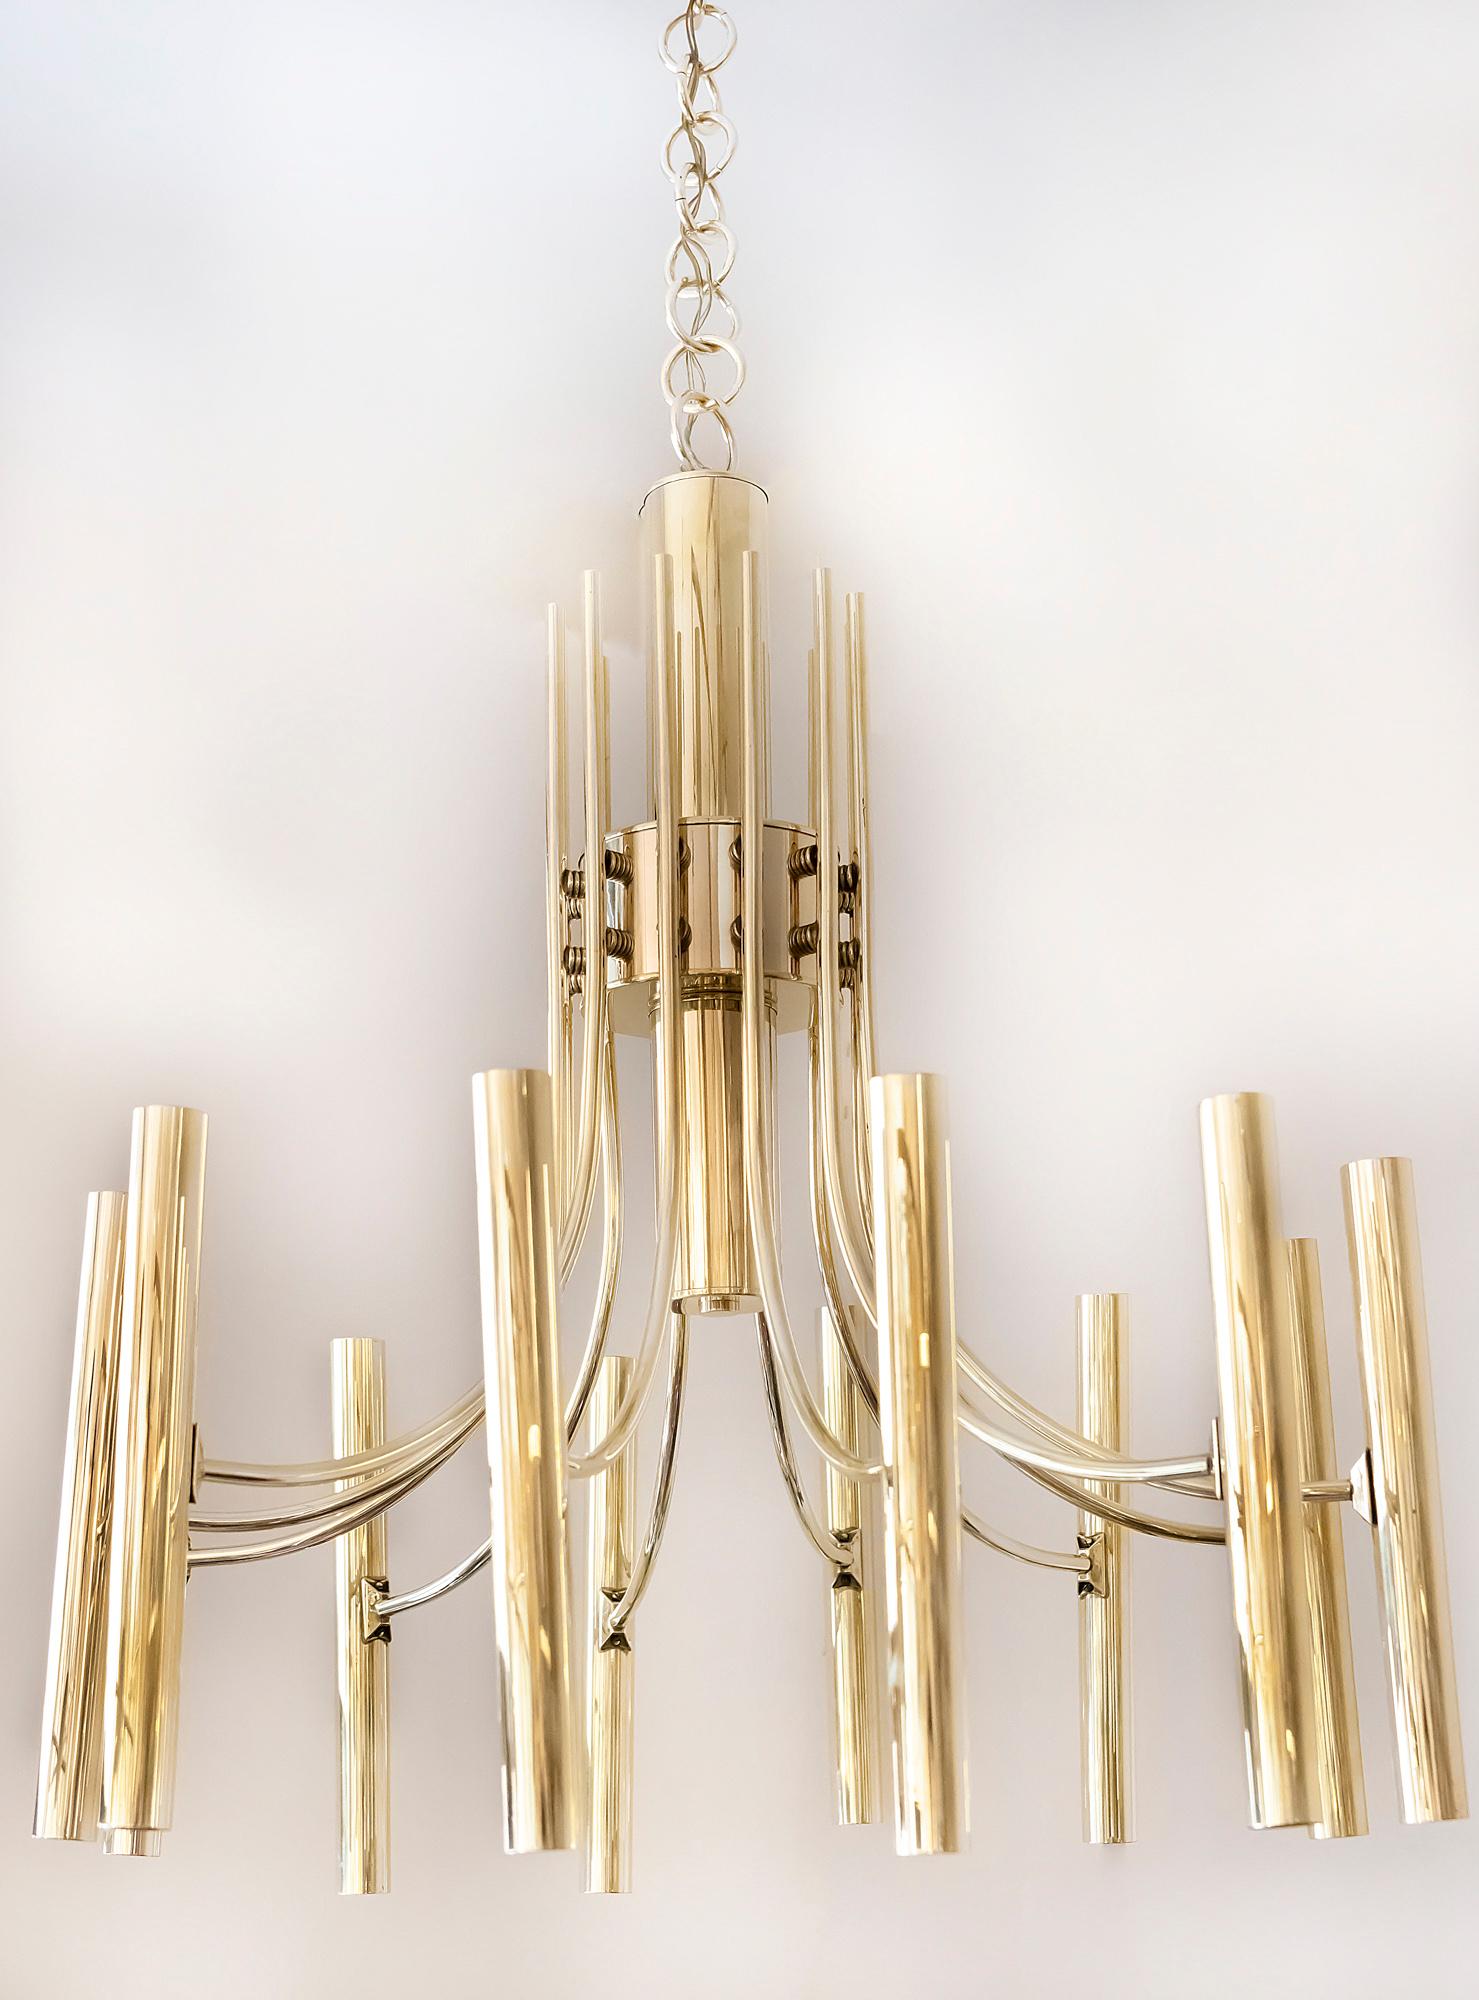 Italian midcentury chandelier is made of brass. This chandelier includes 24 pcs. E14 bulbs that are lighting up and down. The brass is newly polished.

 